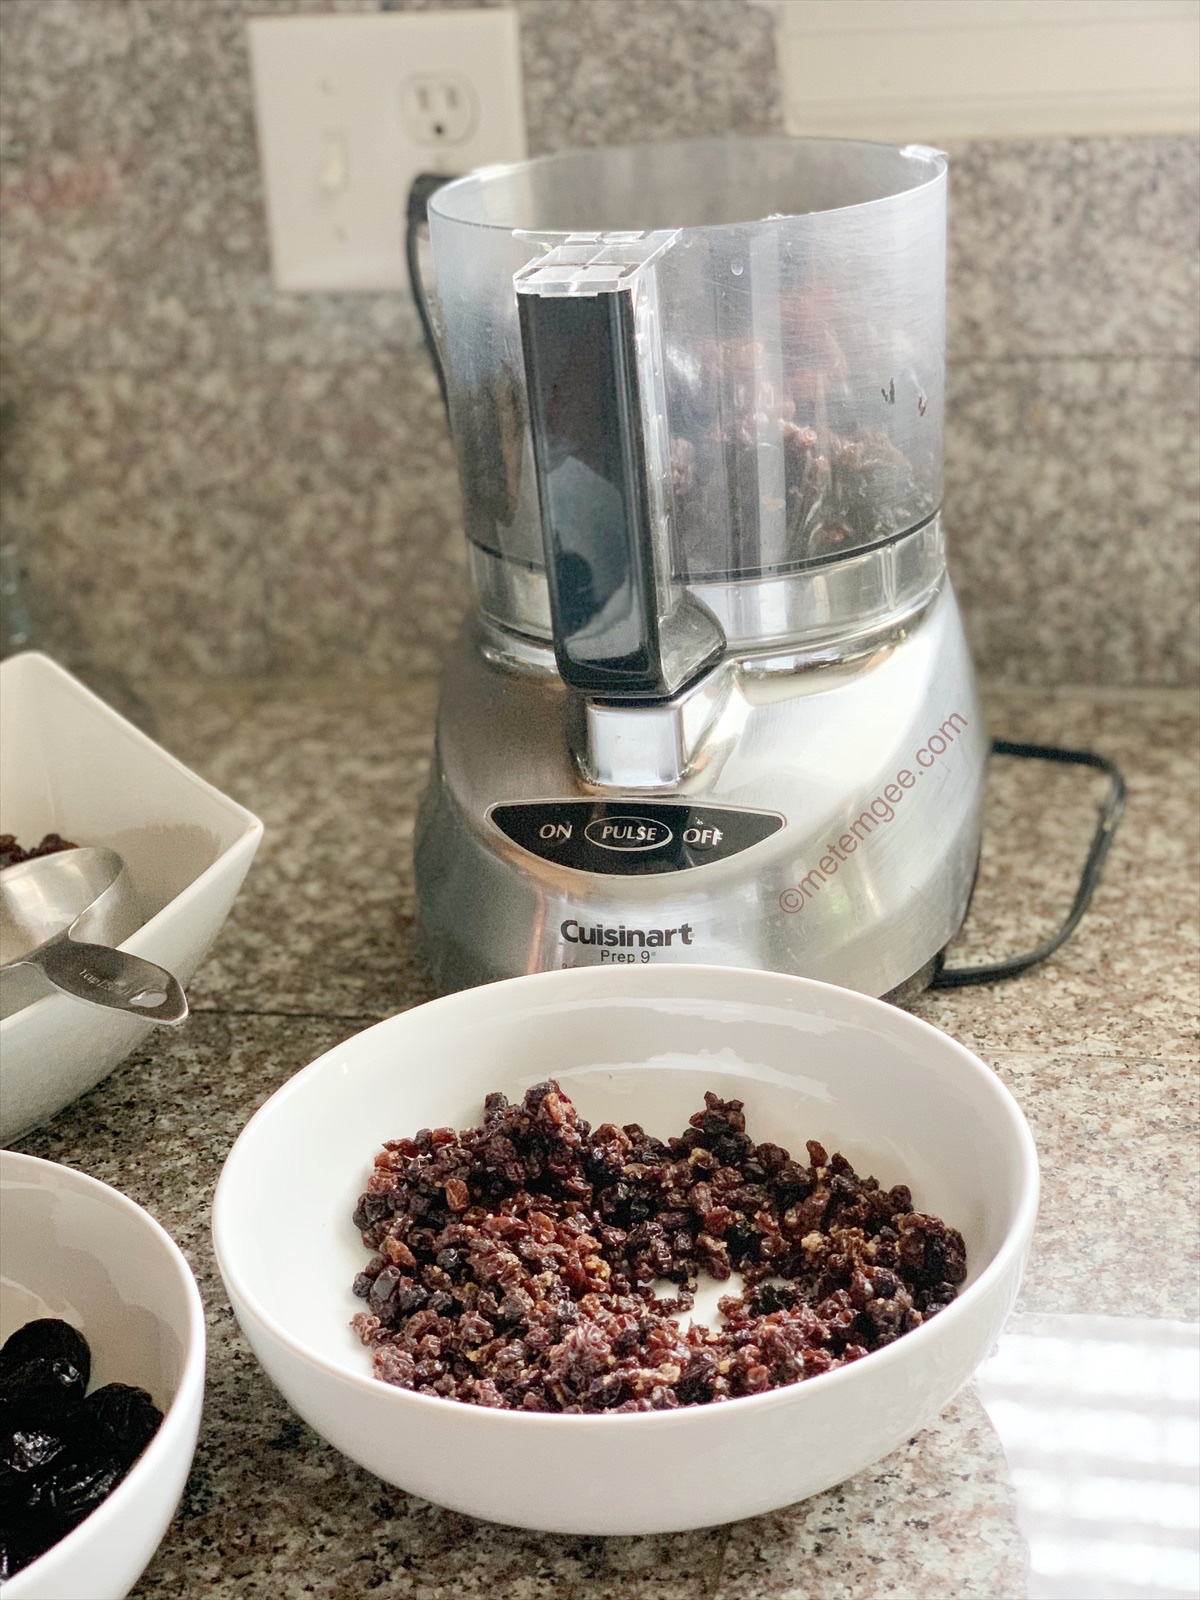 dried fruits being added to a food processor